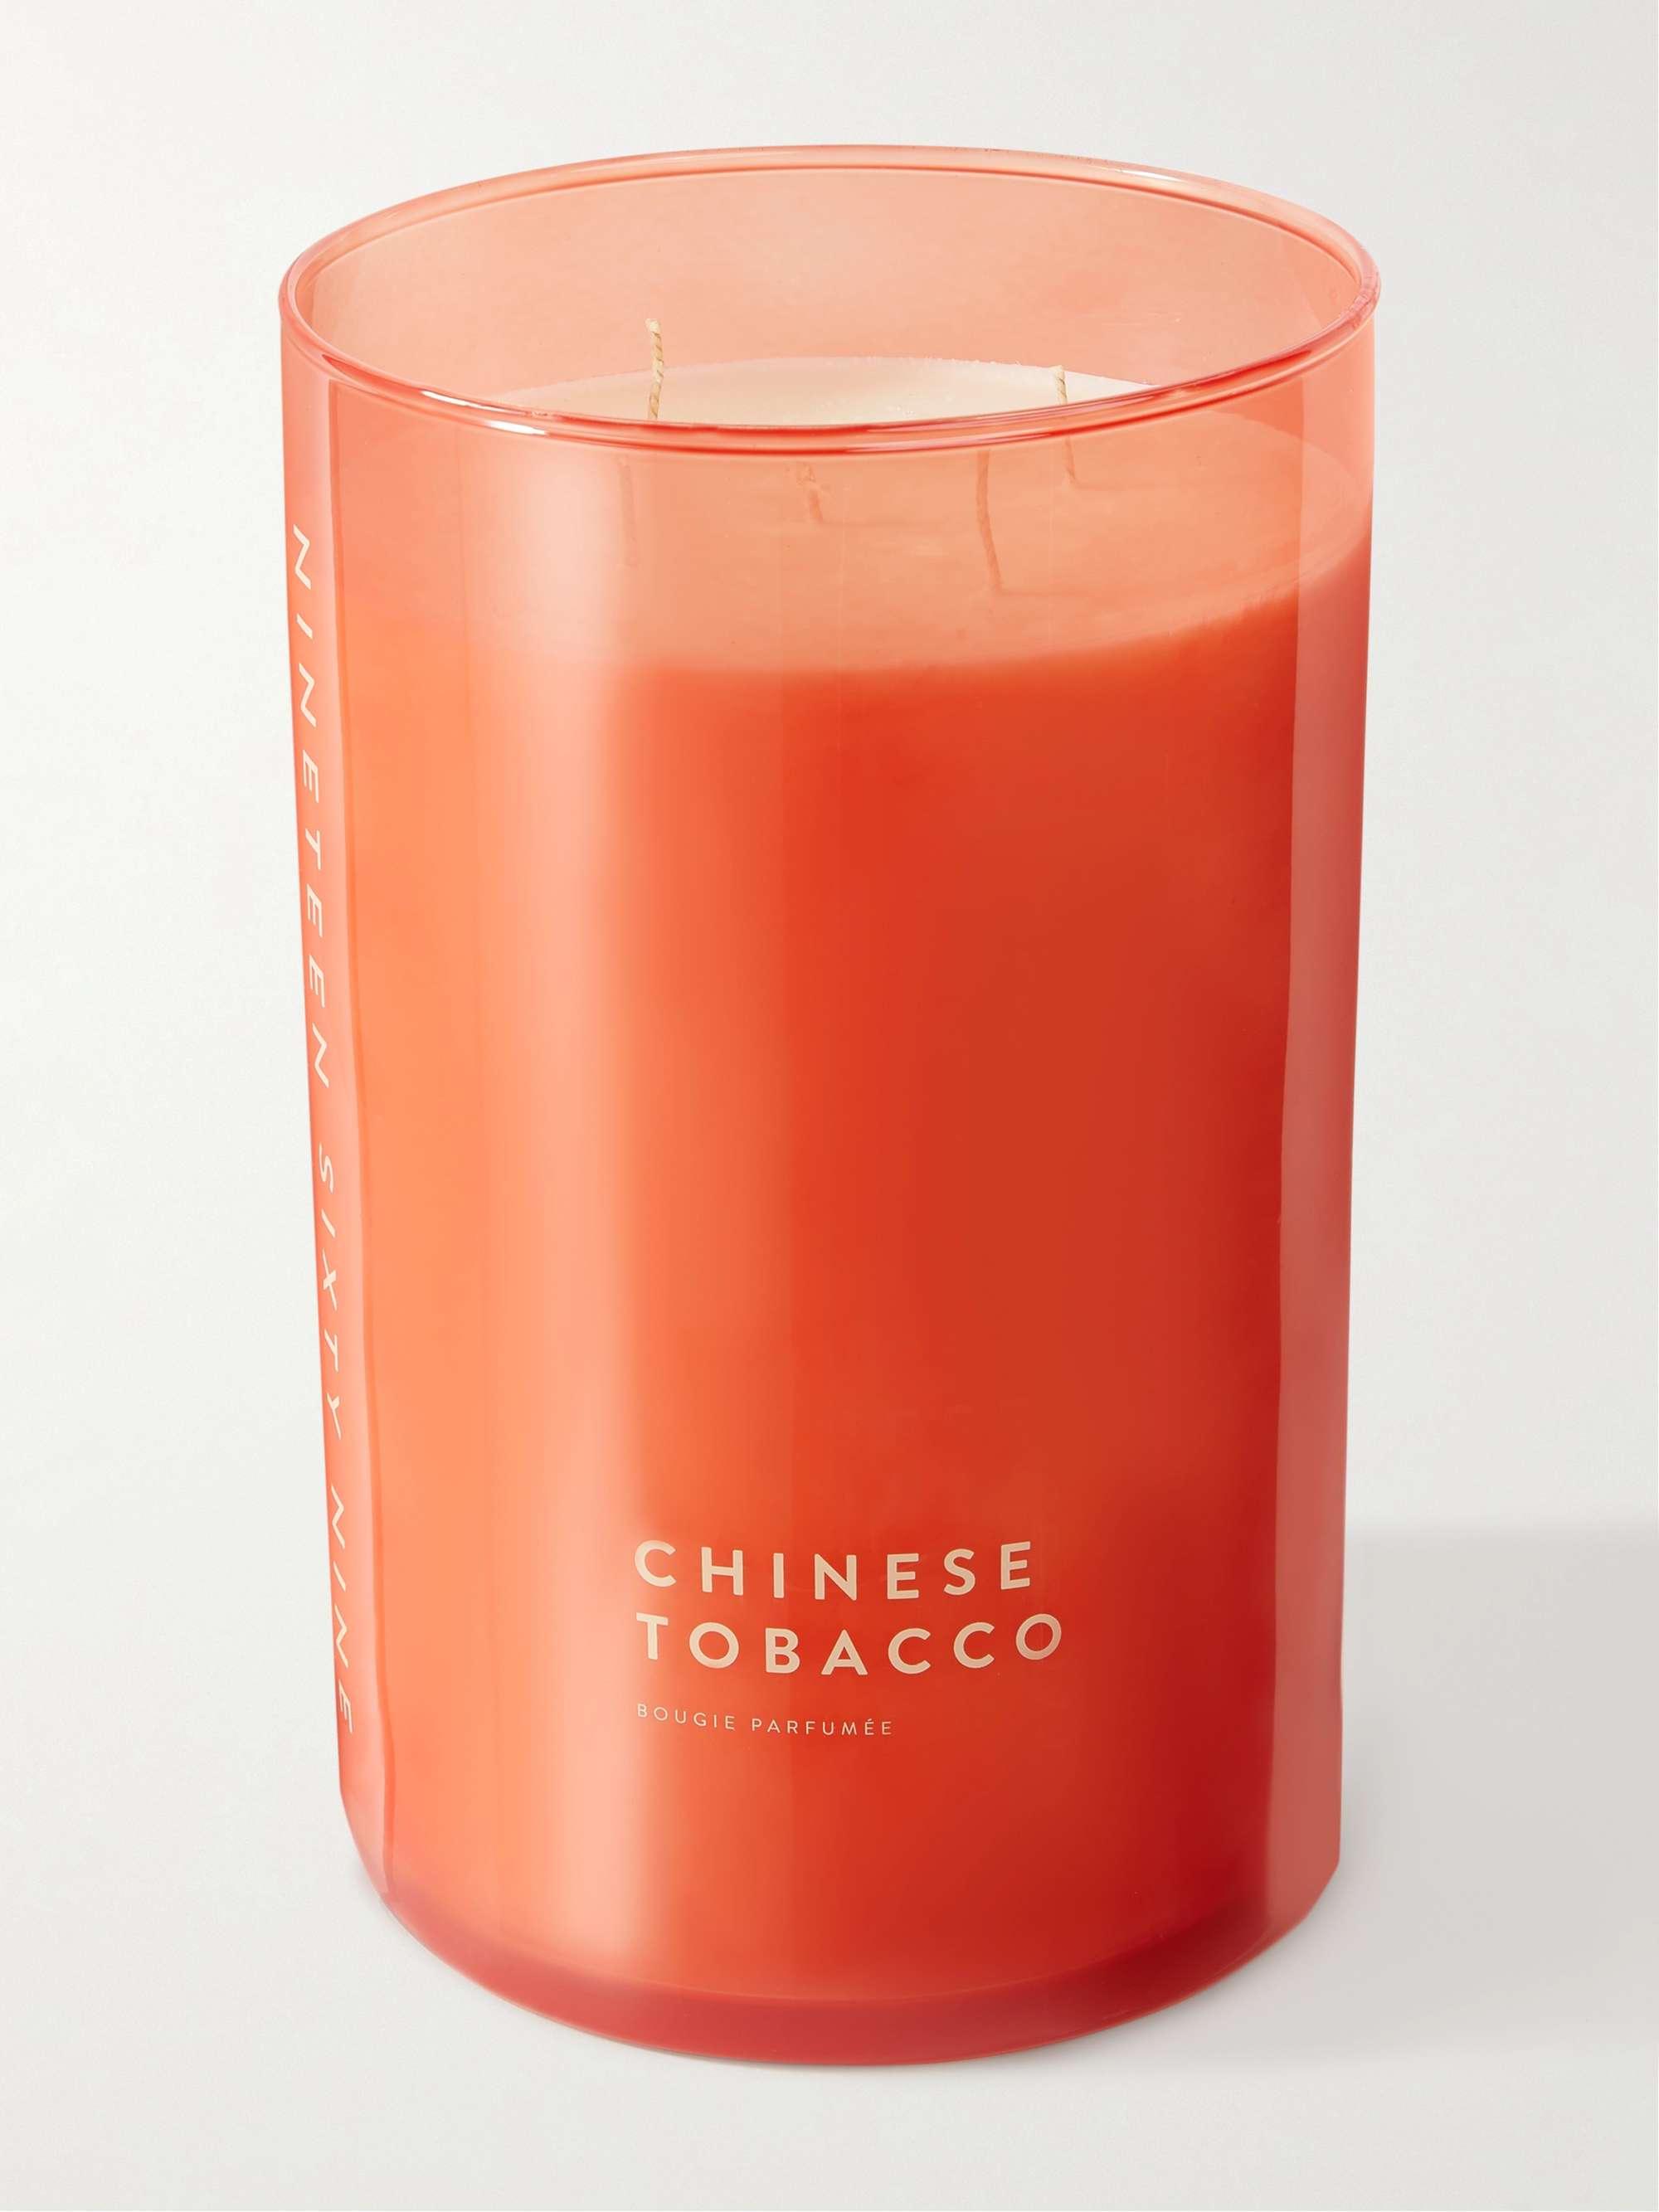 19-69 Chinese Tobacco Scented Candle, 198g